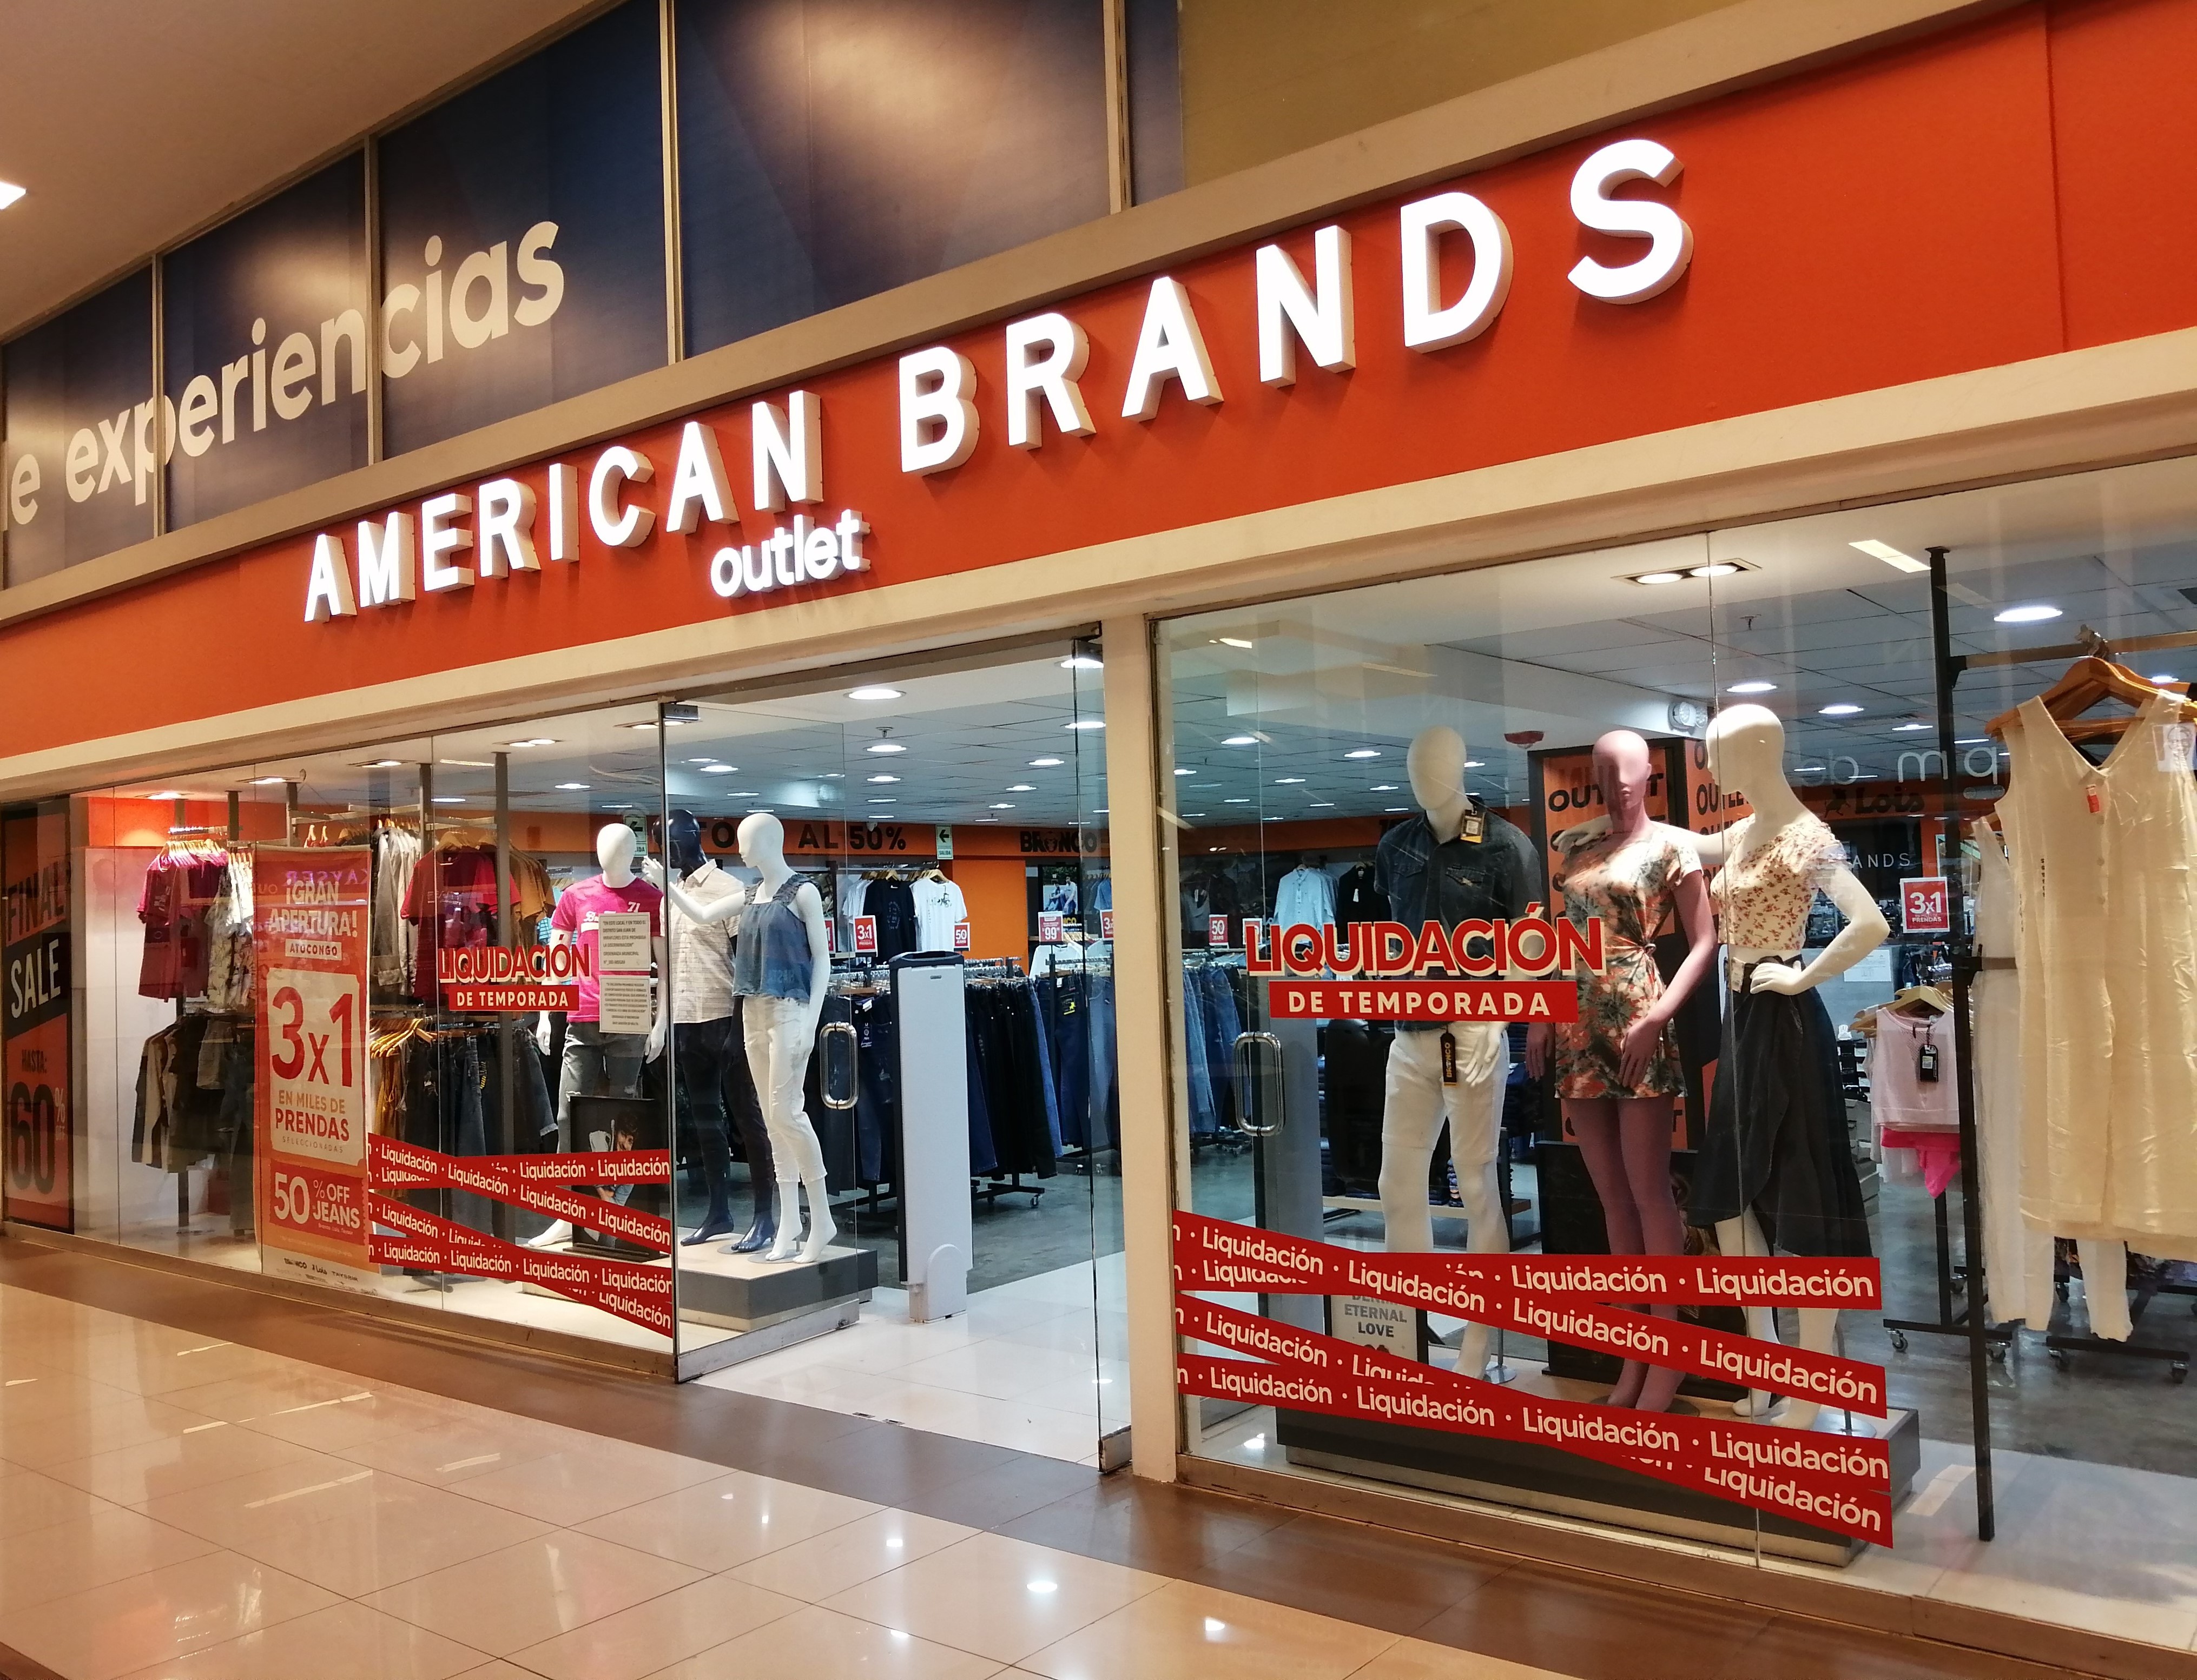 American Brands Outlet